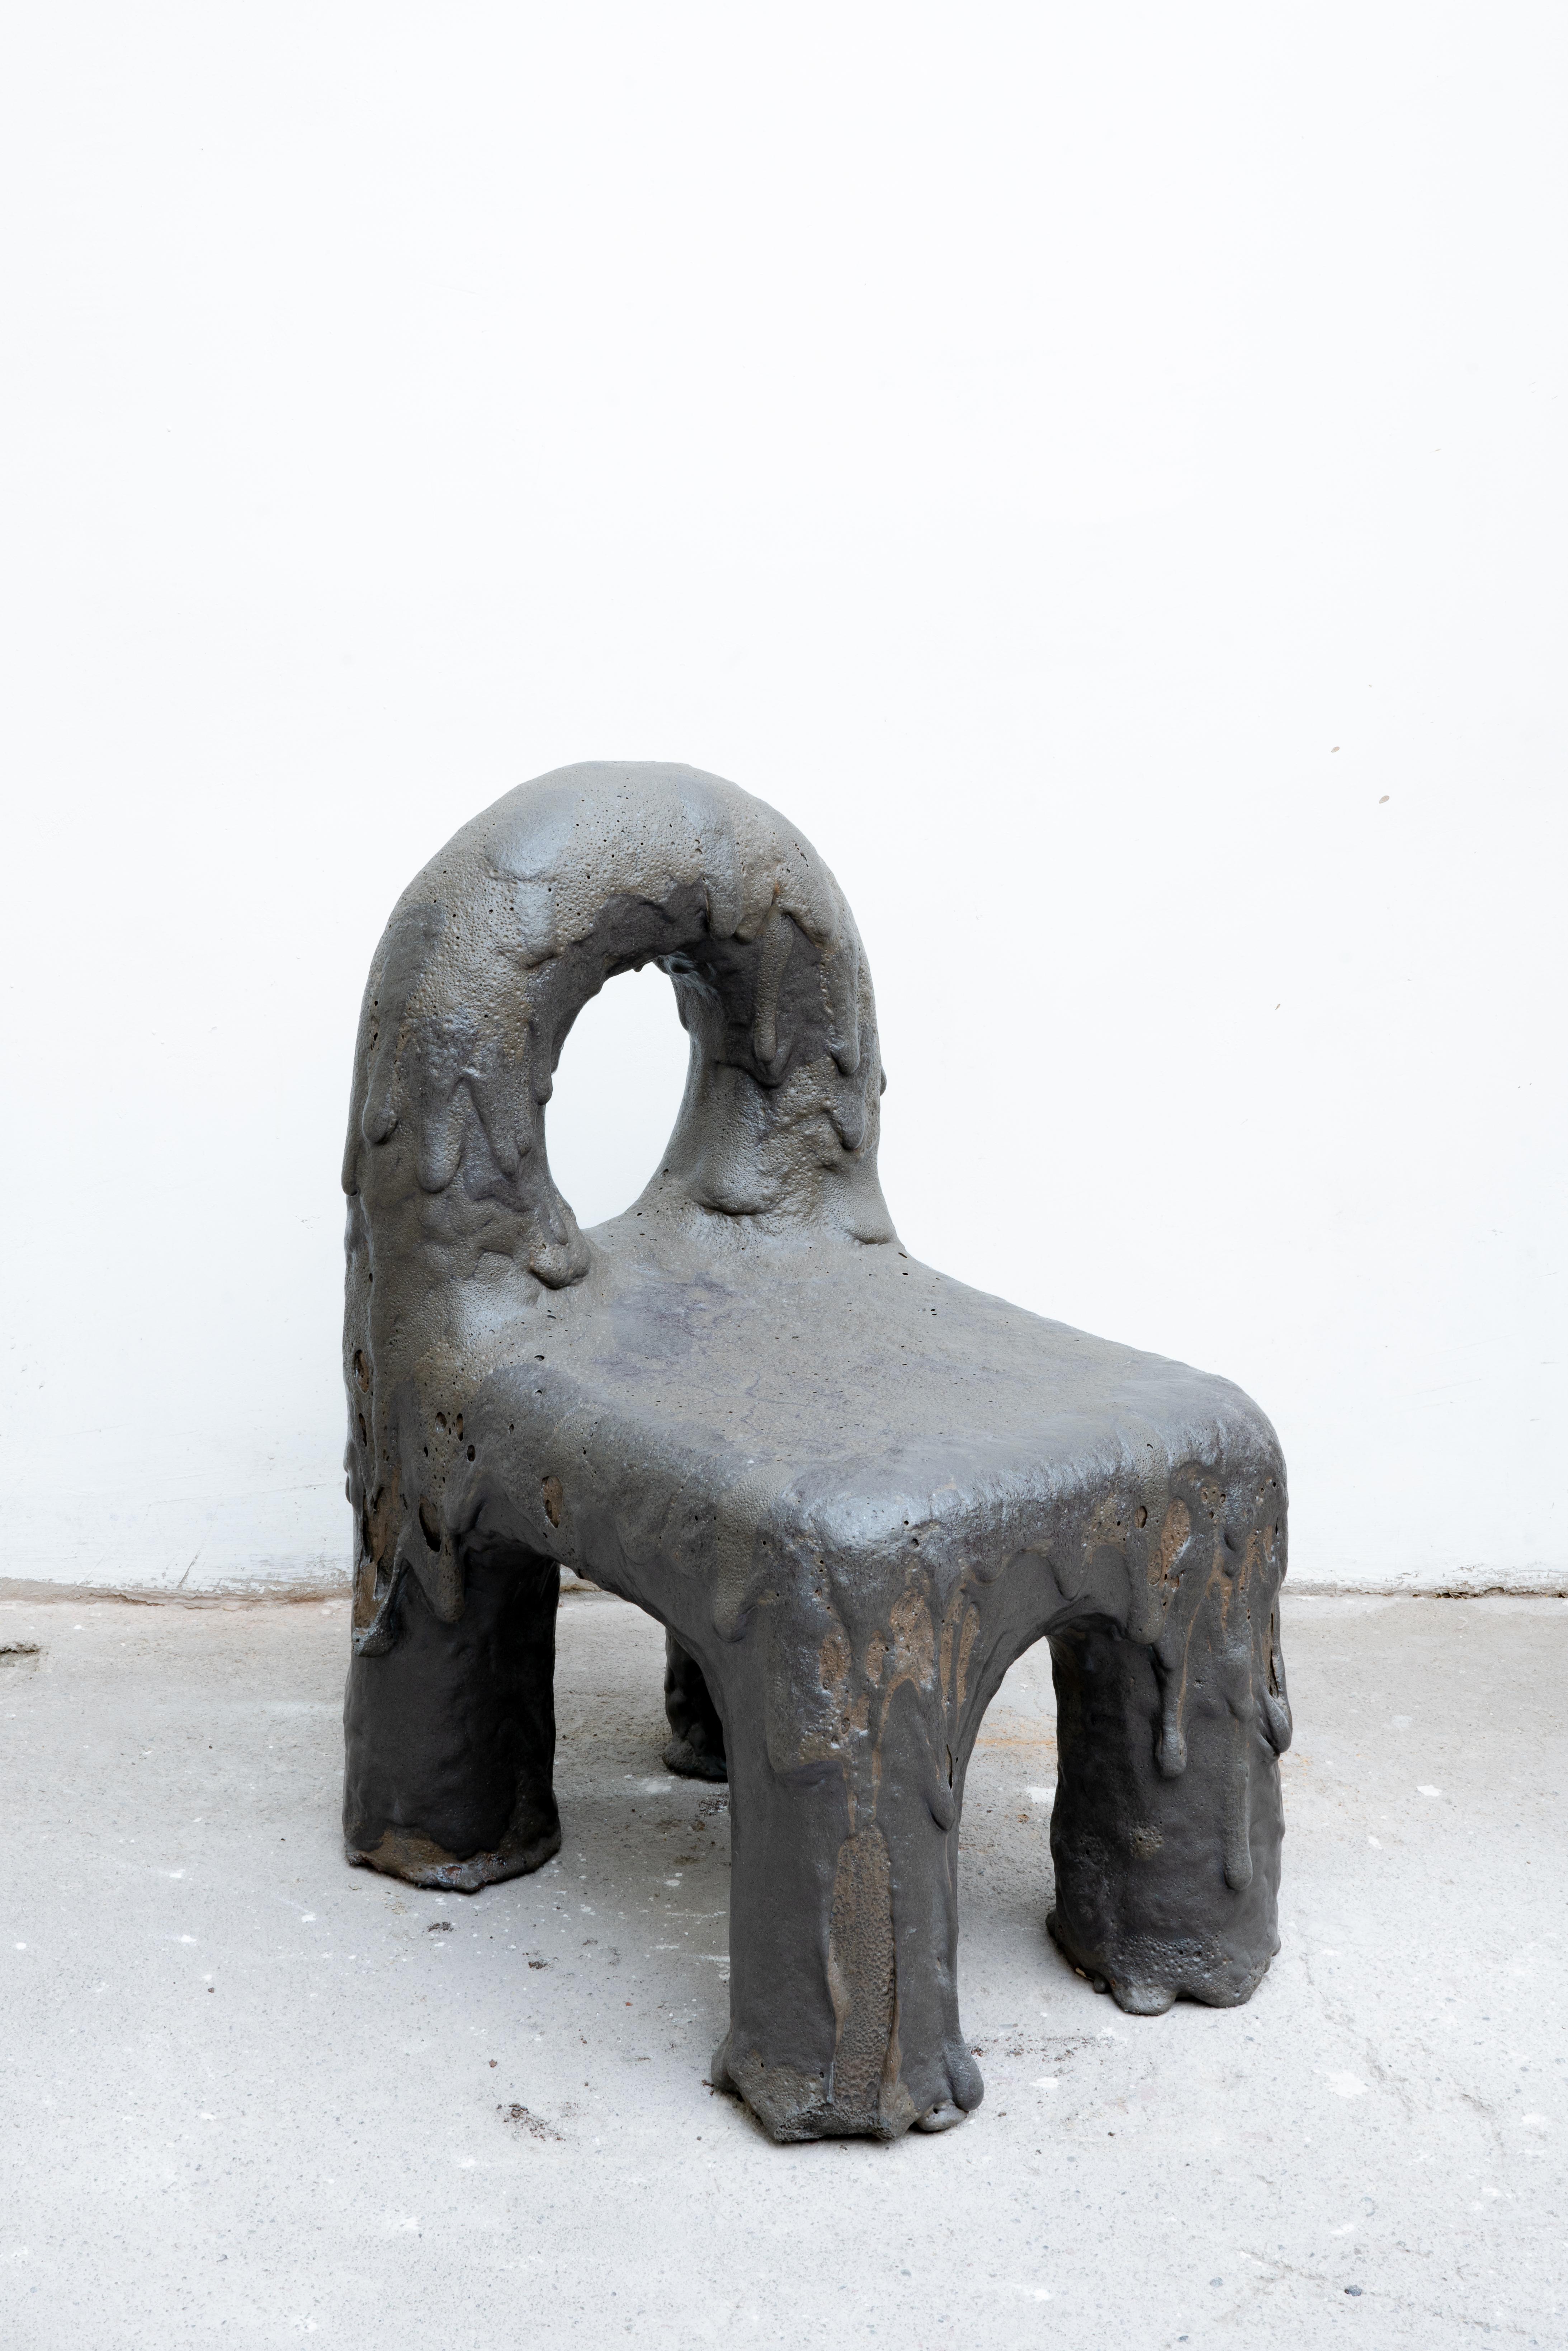 gt2P 'Great, Things to People', Monolita Chair 15, Stoneware, Volcanic Lava 2